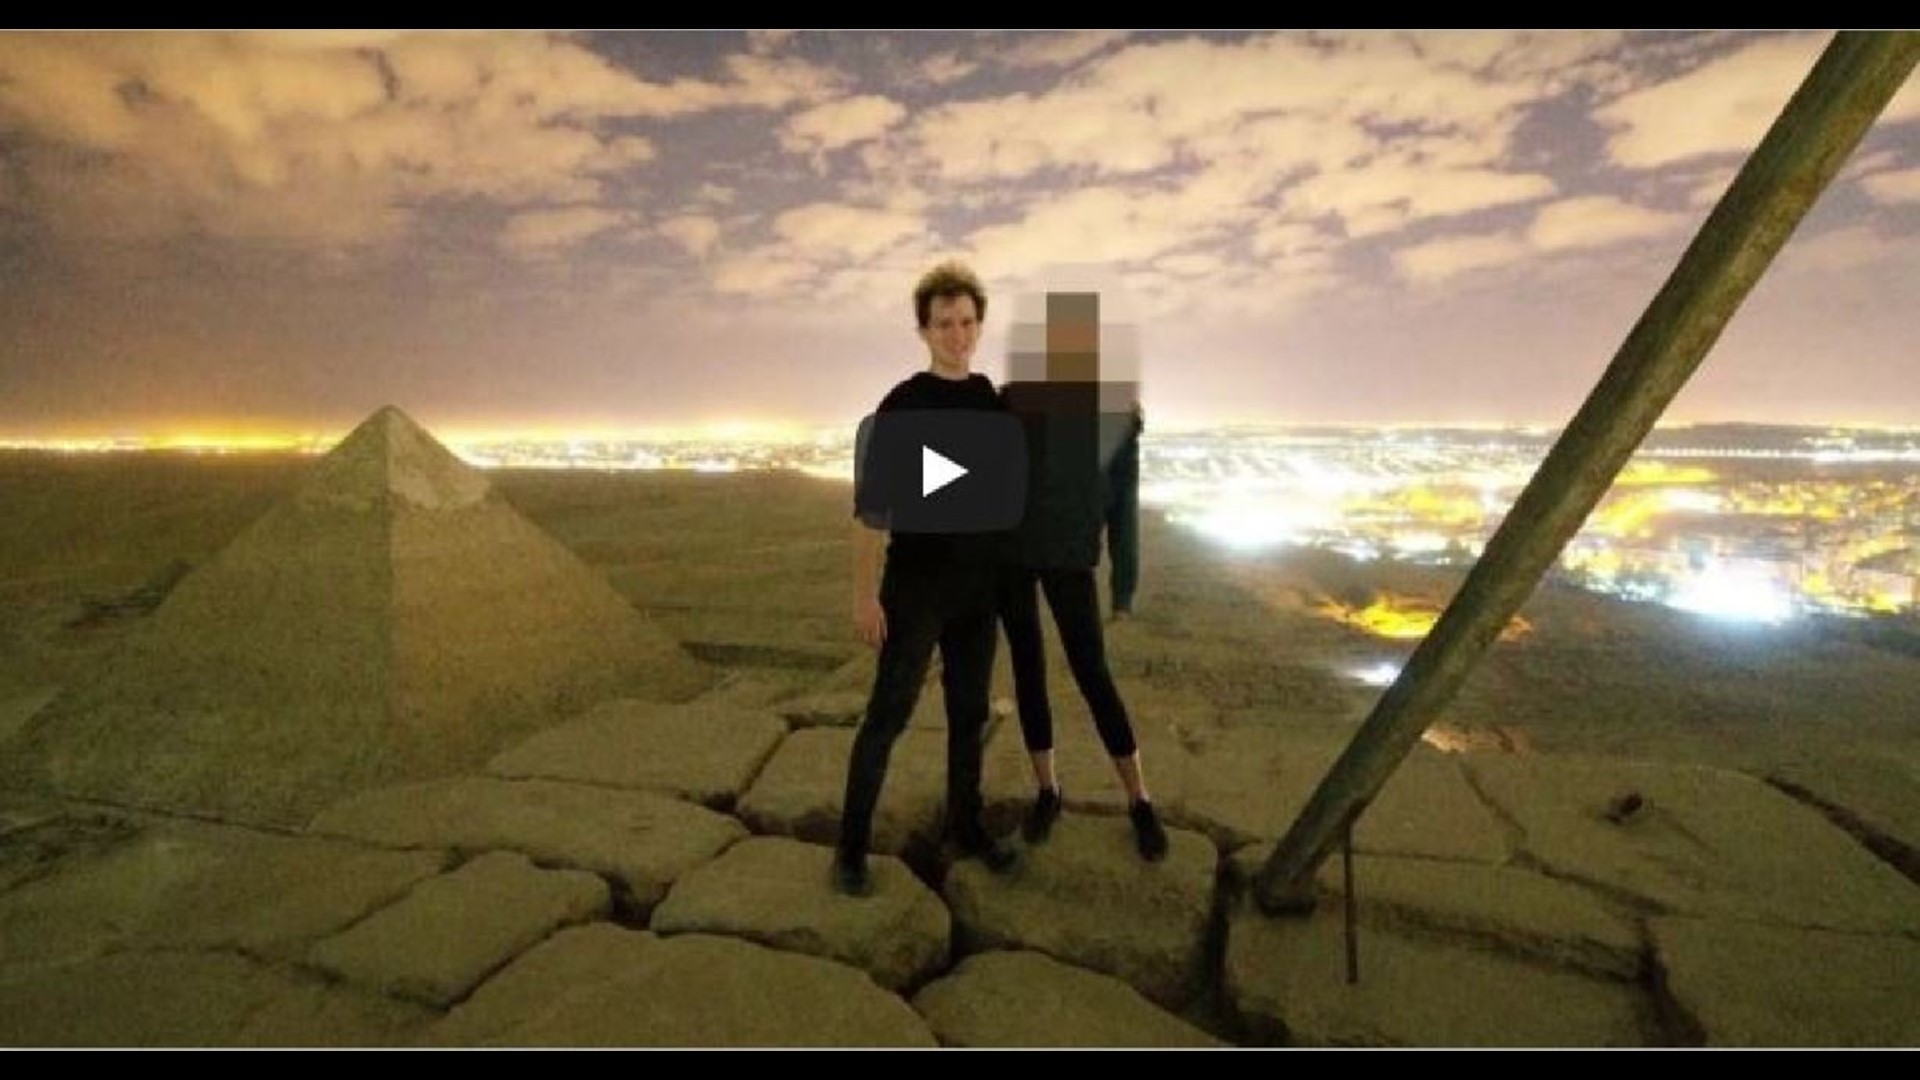 Egypt Probes Images Of Naked Couple Atop Pyramid The East African My